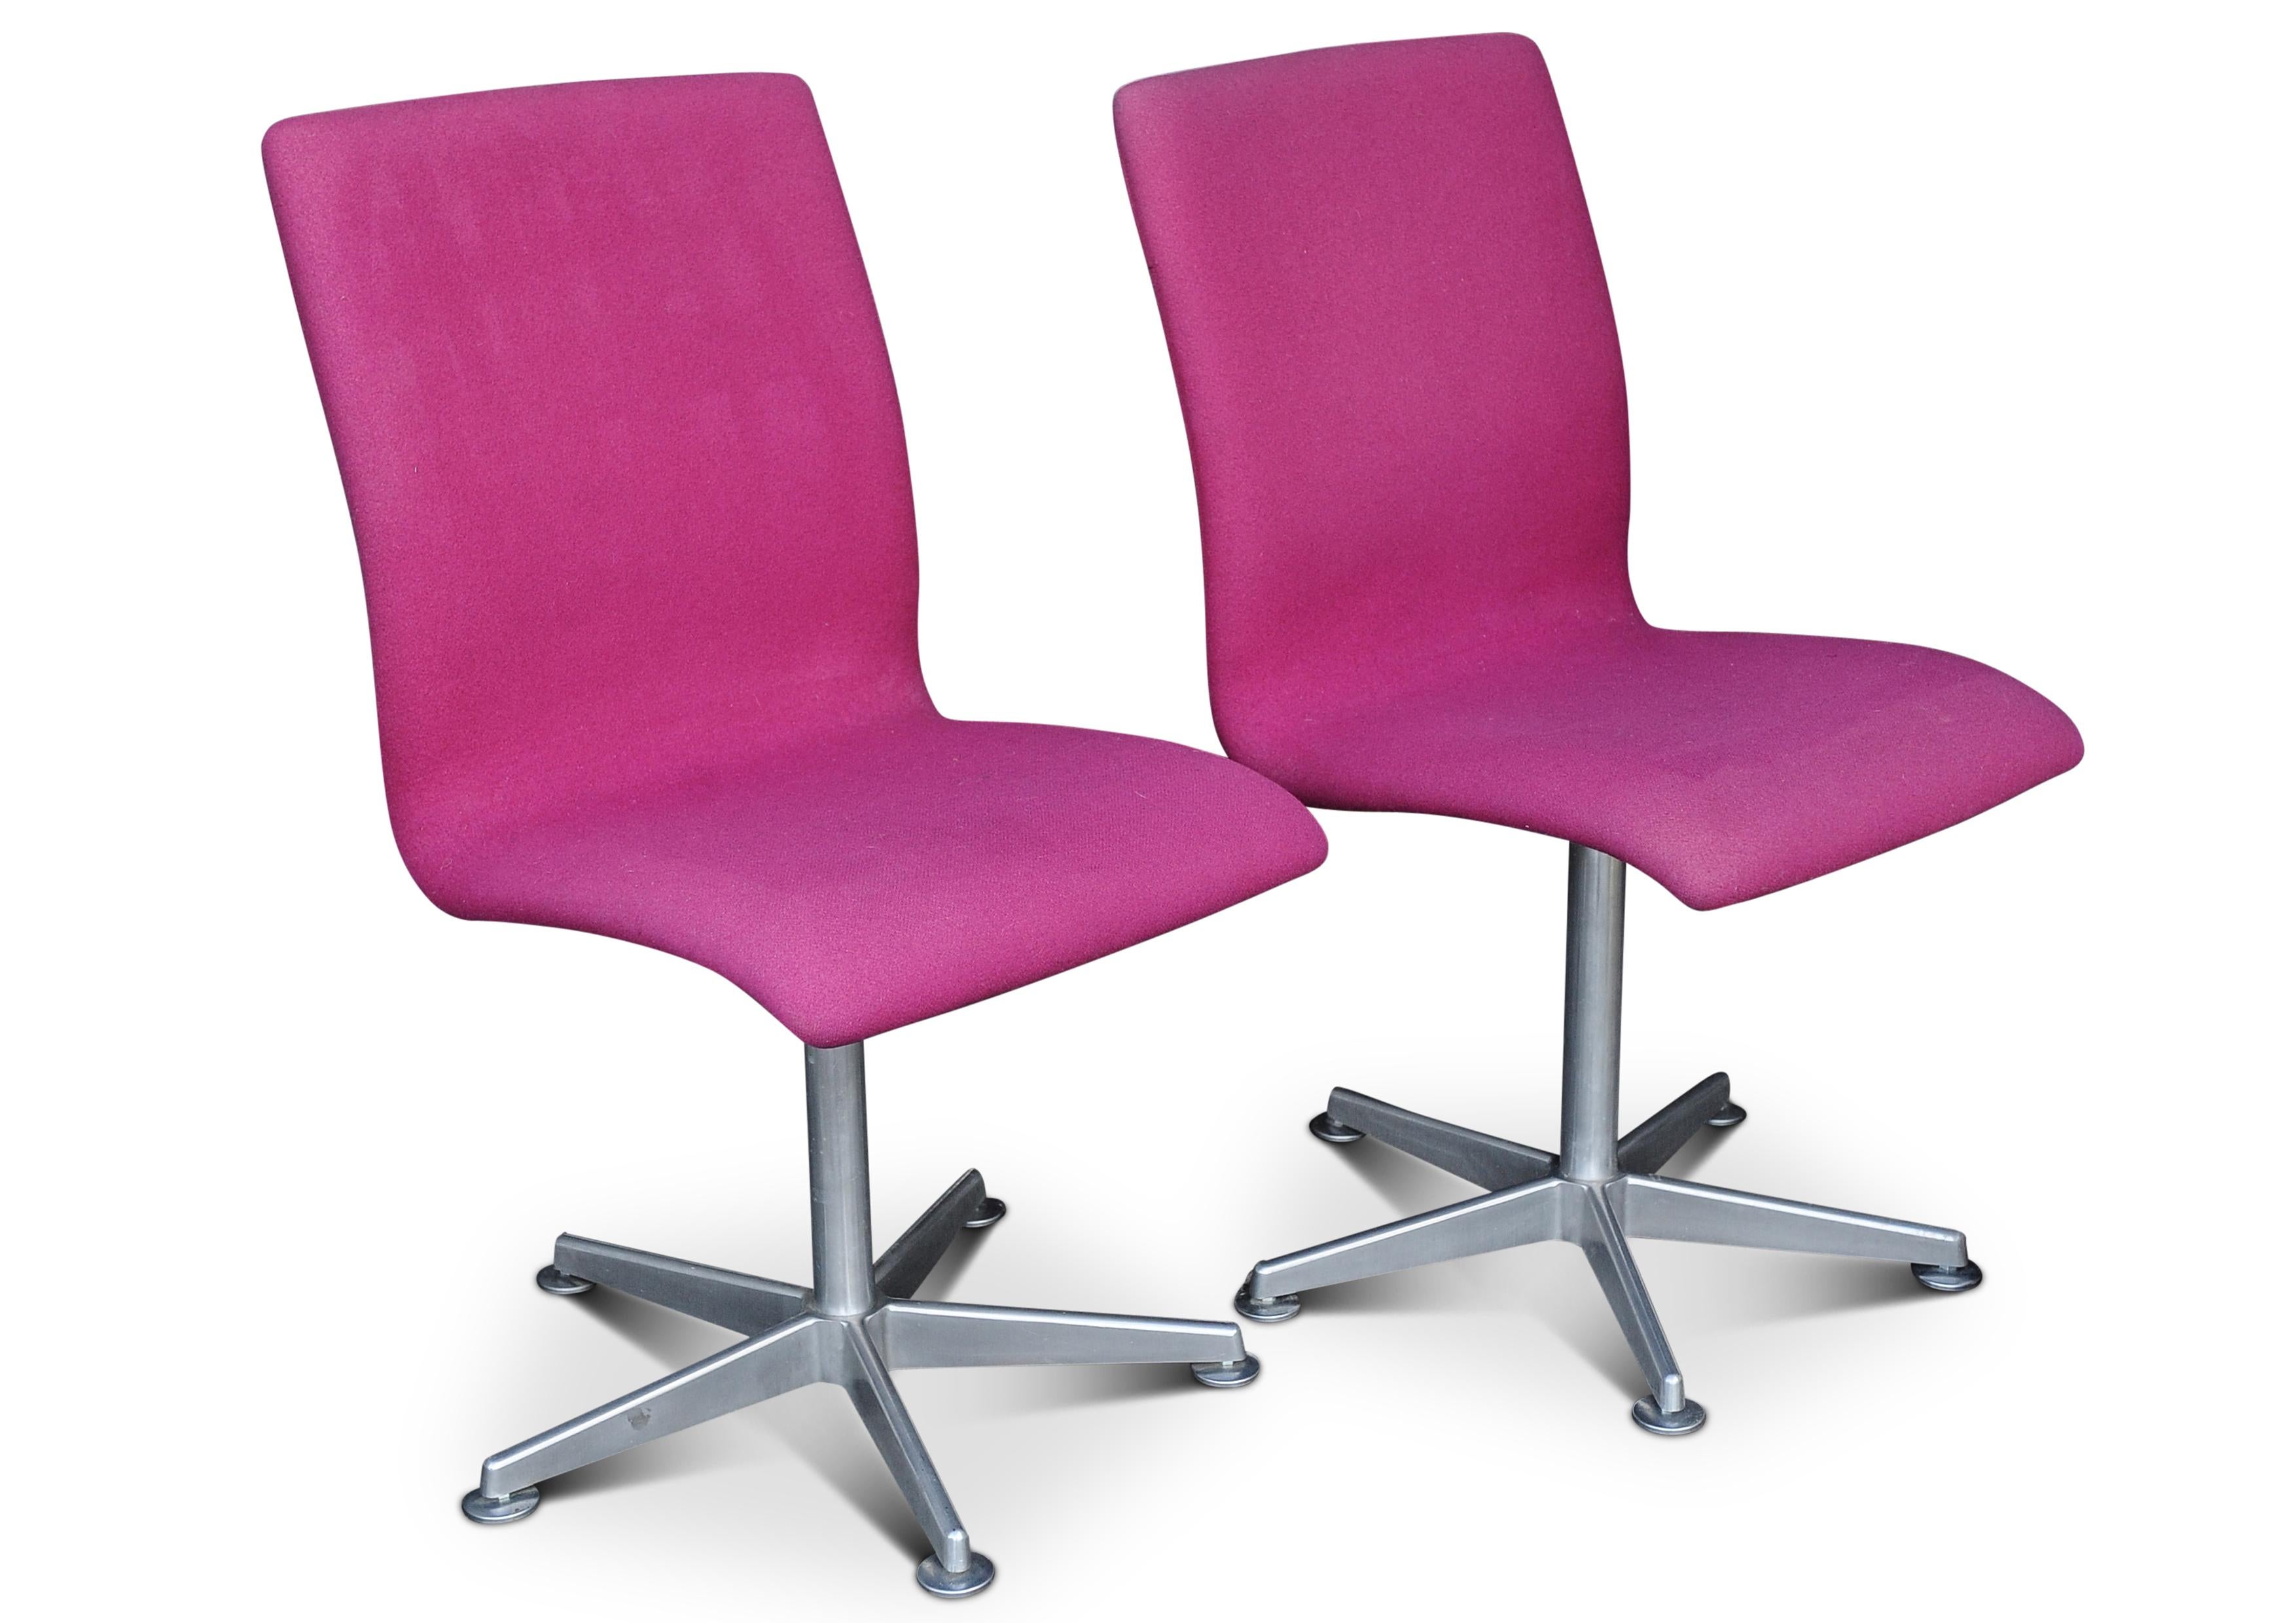 Arne Jacobsen (1902-1971) Oxford E1107 Pink Upholstered Swivel Chair for Fritz Hansen Made in Denmark 2002.

Both have labels under the seat, there are two chairs in stock, price per chair.
Height to seat 45cm

Timeless office chair by Arne